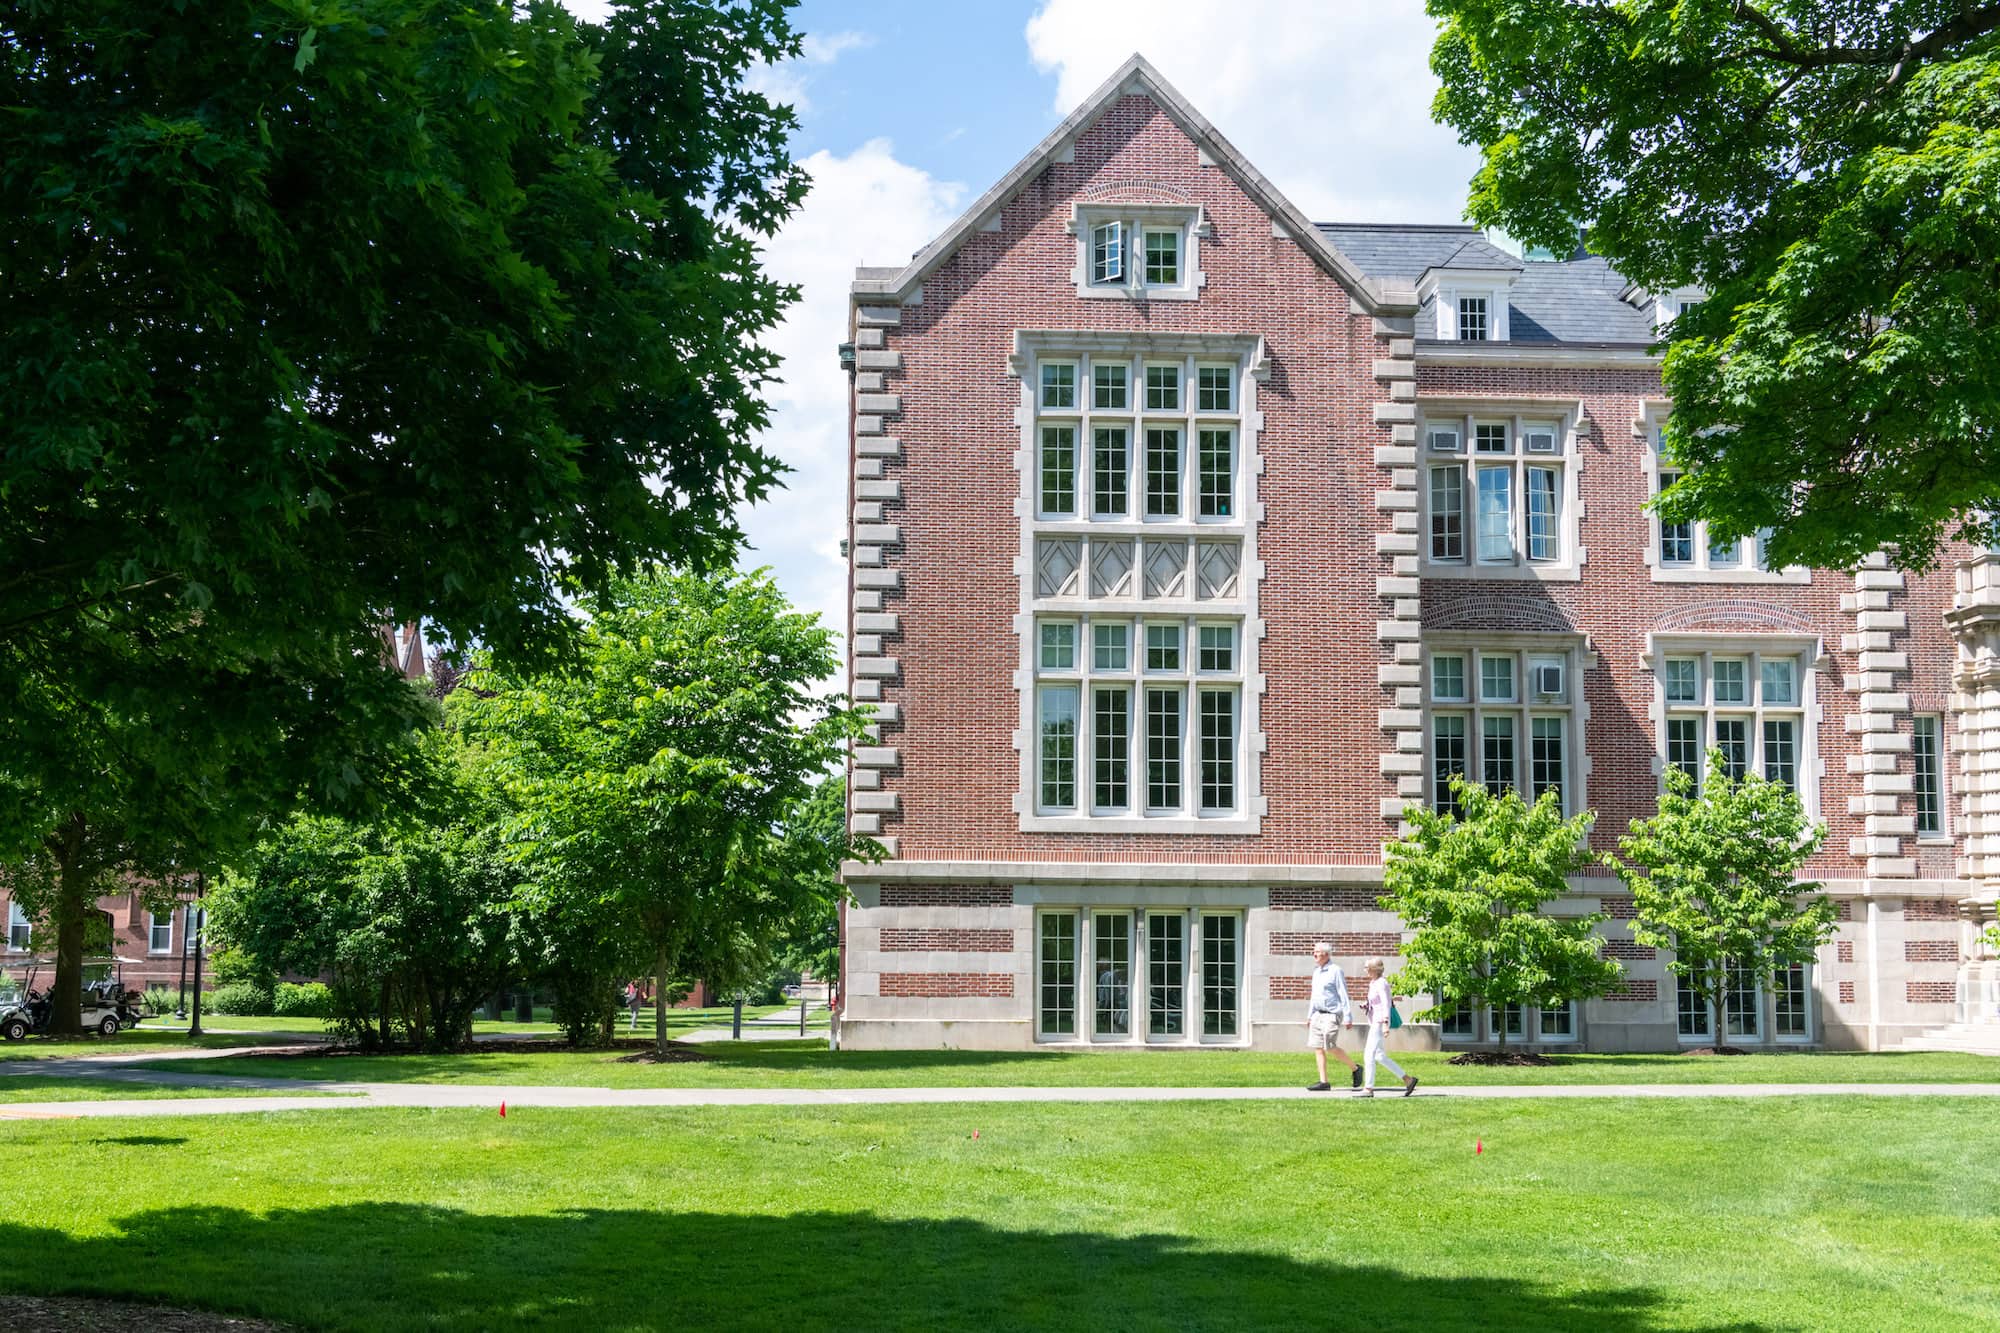 Two people walking in front of Rockefeller Hall, a large red brick building with many windows on the Vassar campus.